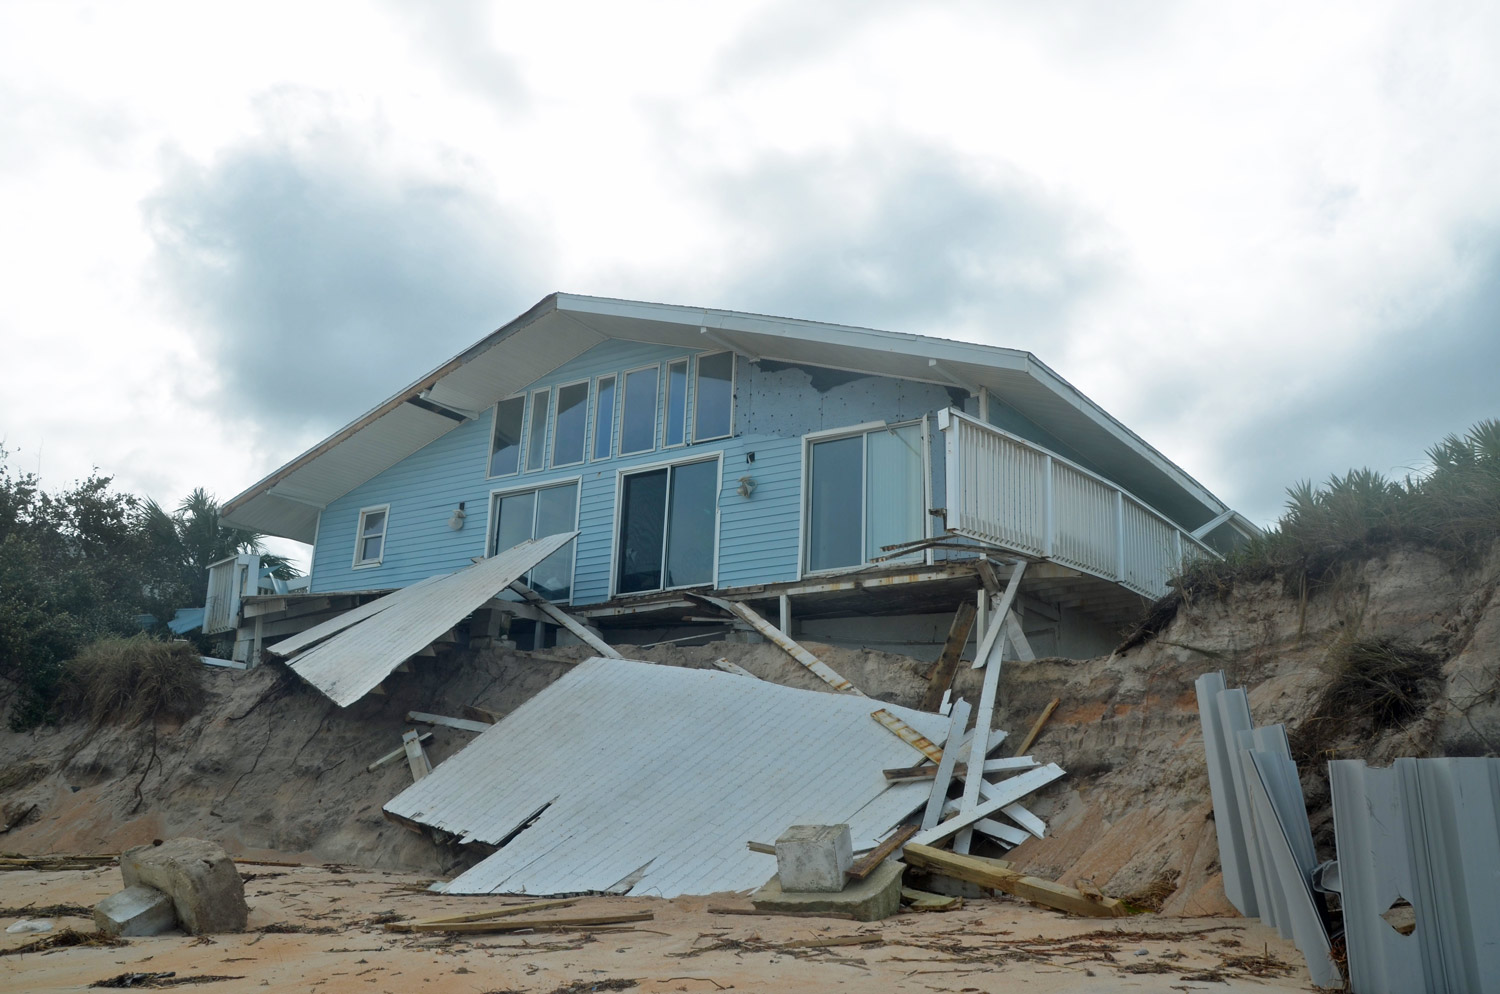 One of the more heavily damaged houses on Painters Hill, just south of Varn Park, in unincorporated Flagler County, as seen from the ocean. Click on the image for larger view. (© FlaglerLive)